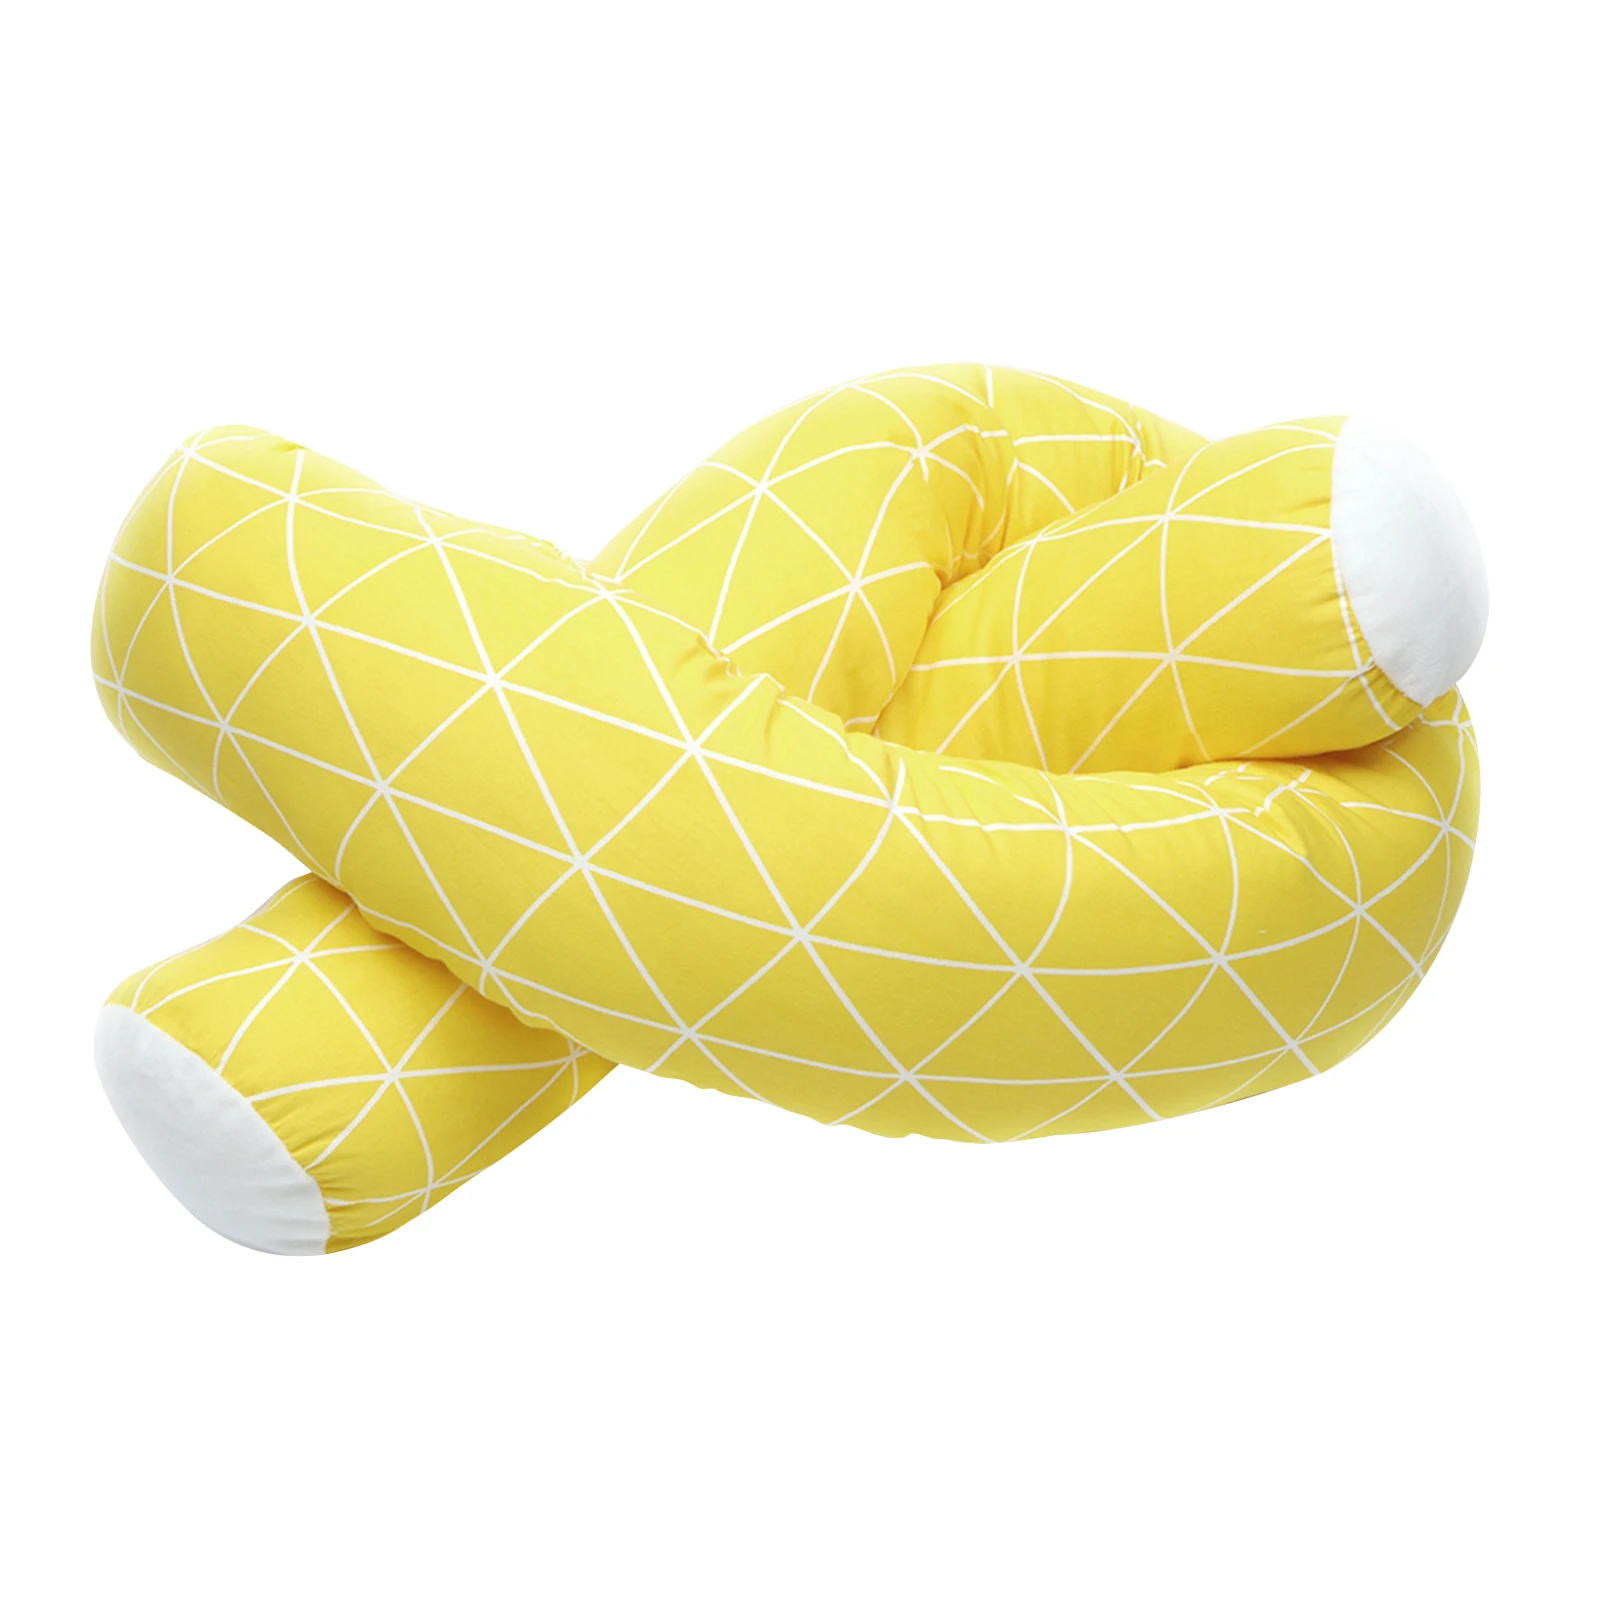 Baoblaze Bed Bumper Snake Pillow Baby Infant Protection from Cot Edges Toddlers Newborn Cradle Bed Decor Blue 200x11 cm